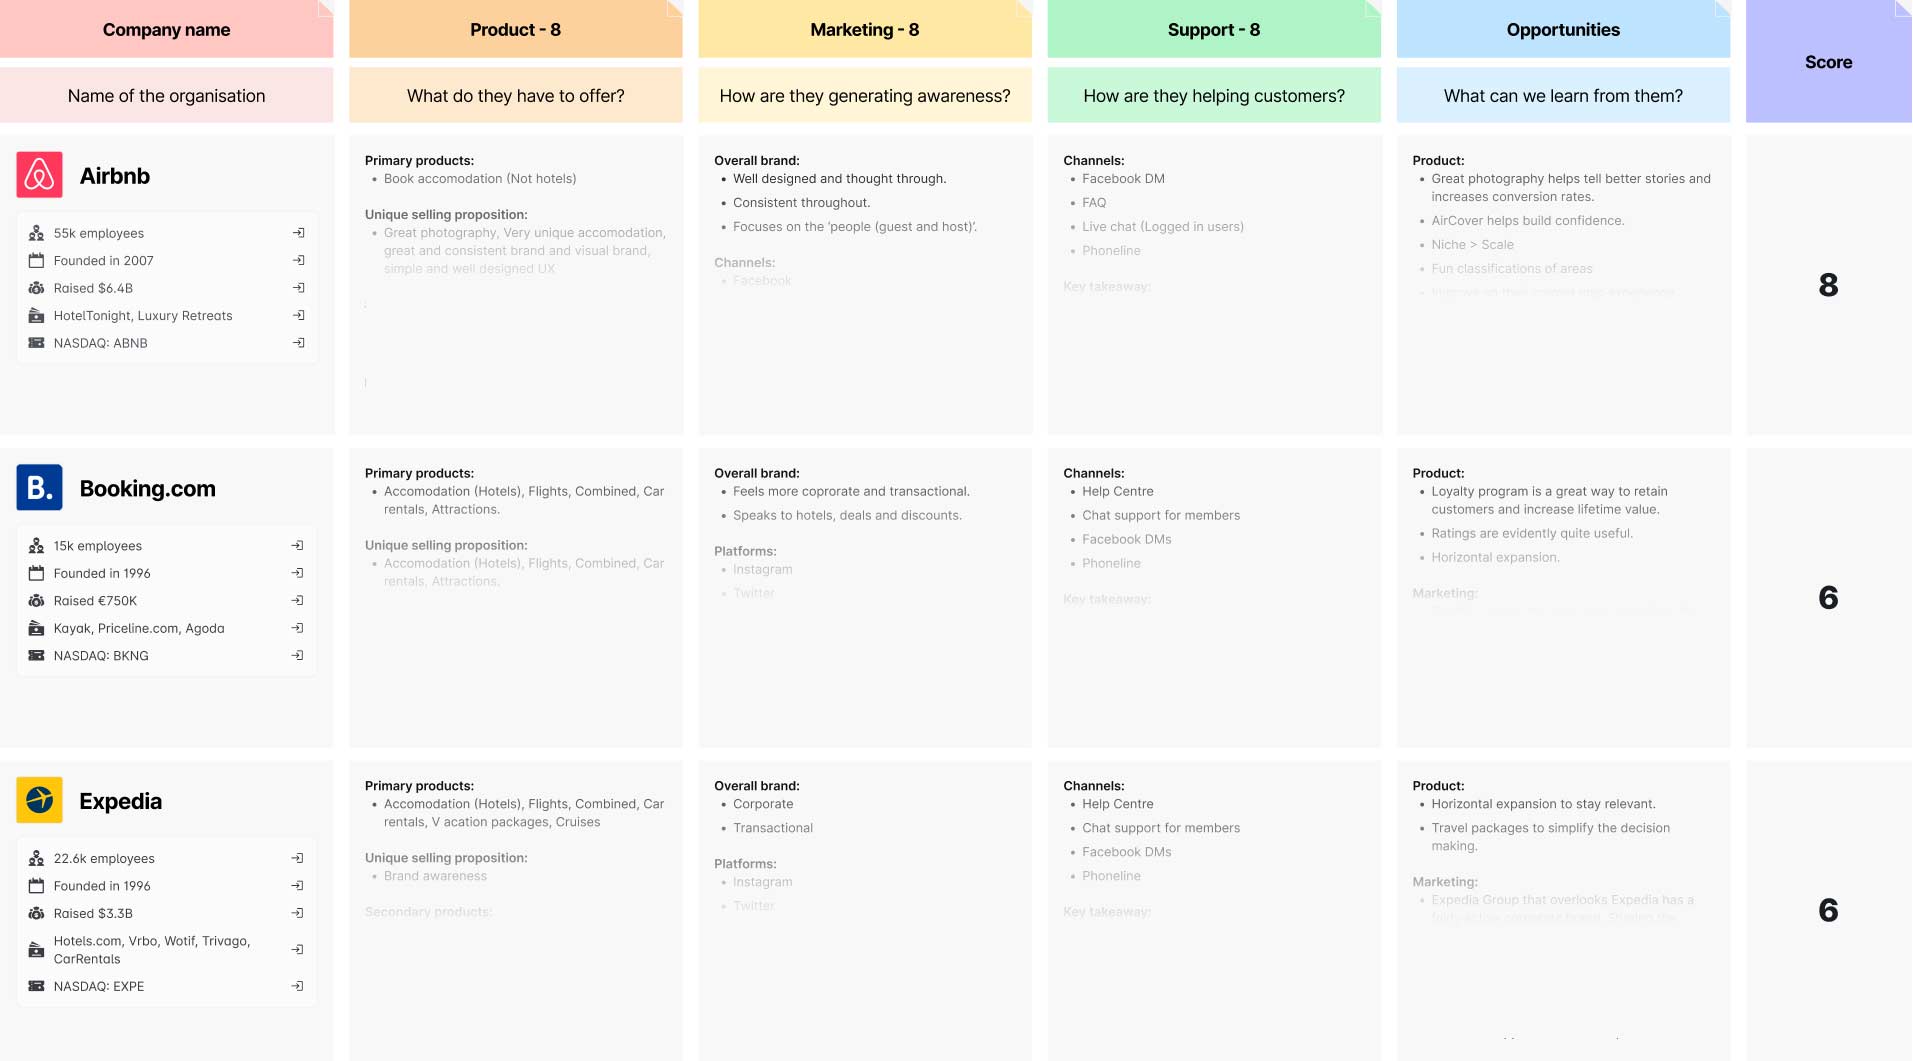 Practical User Research & Strategy By DesignerShip - Mizko - Free Download